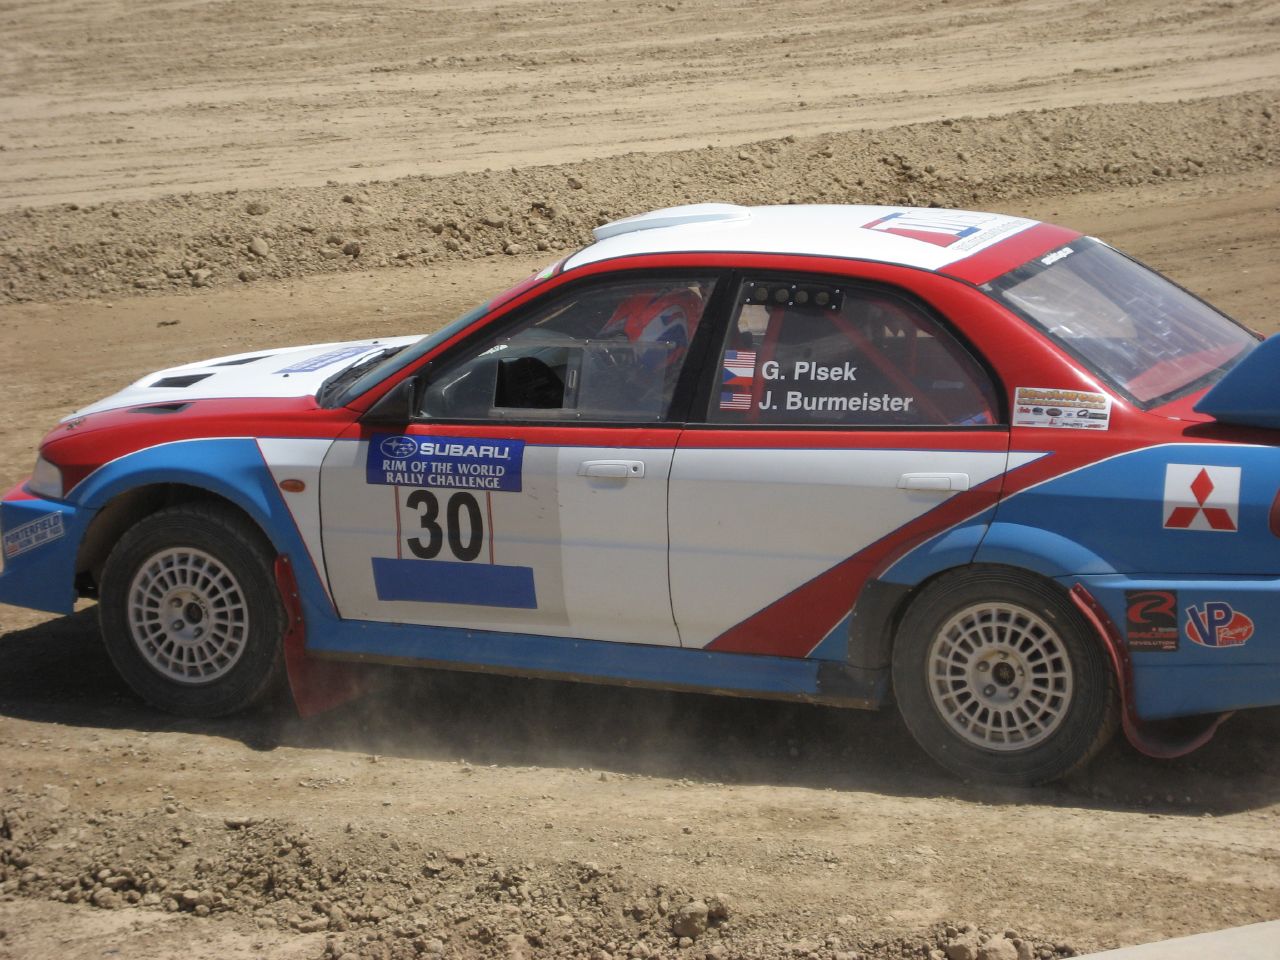 a car in action on a dirt track